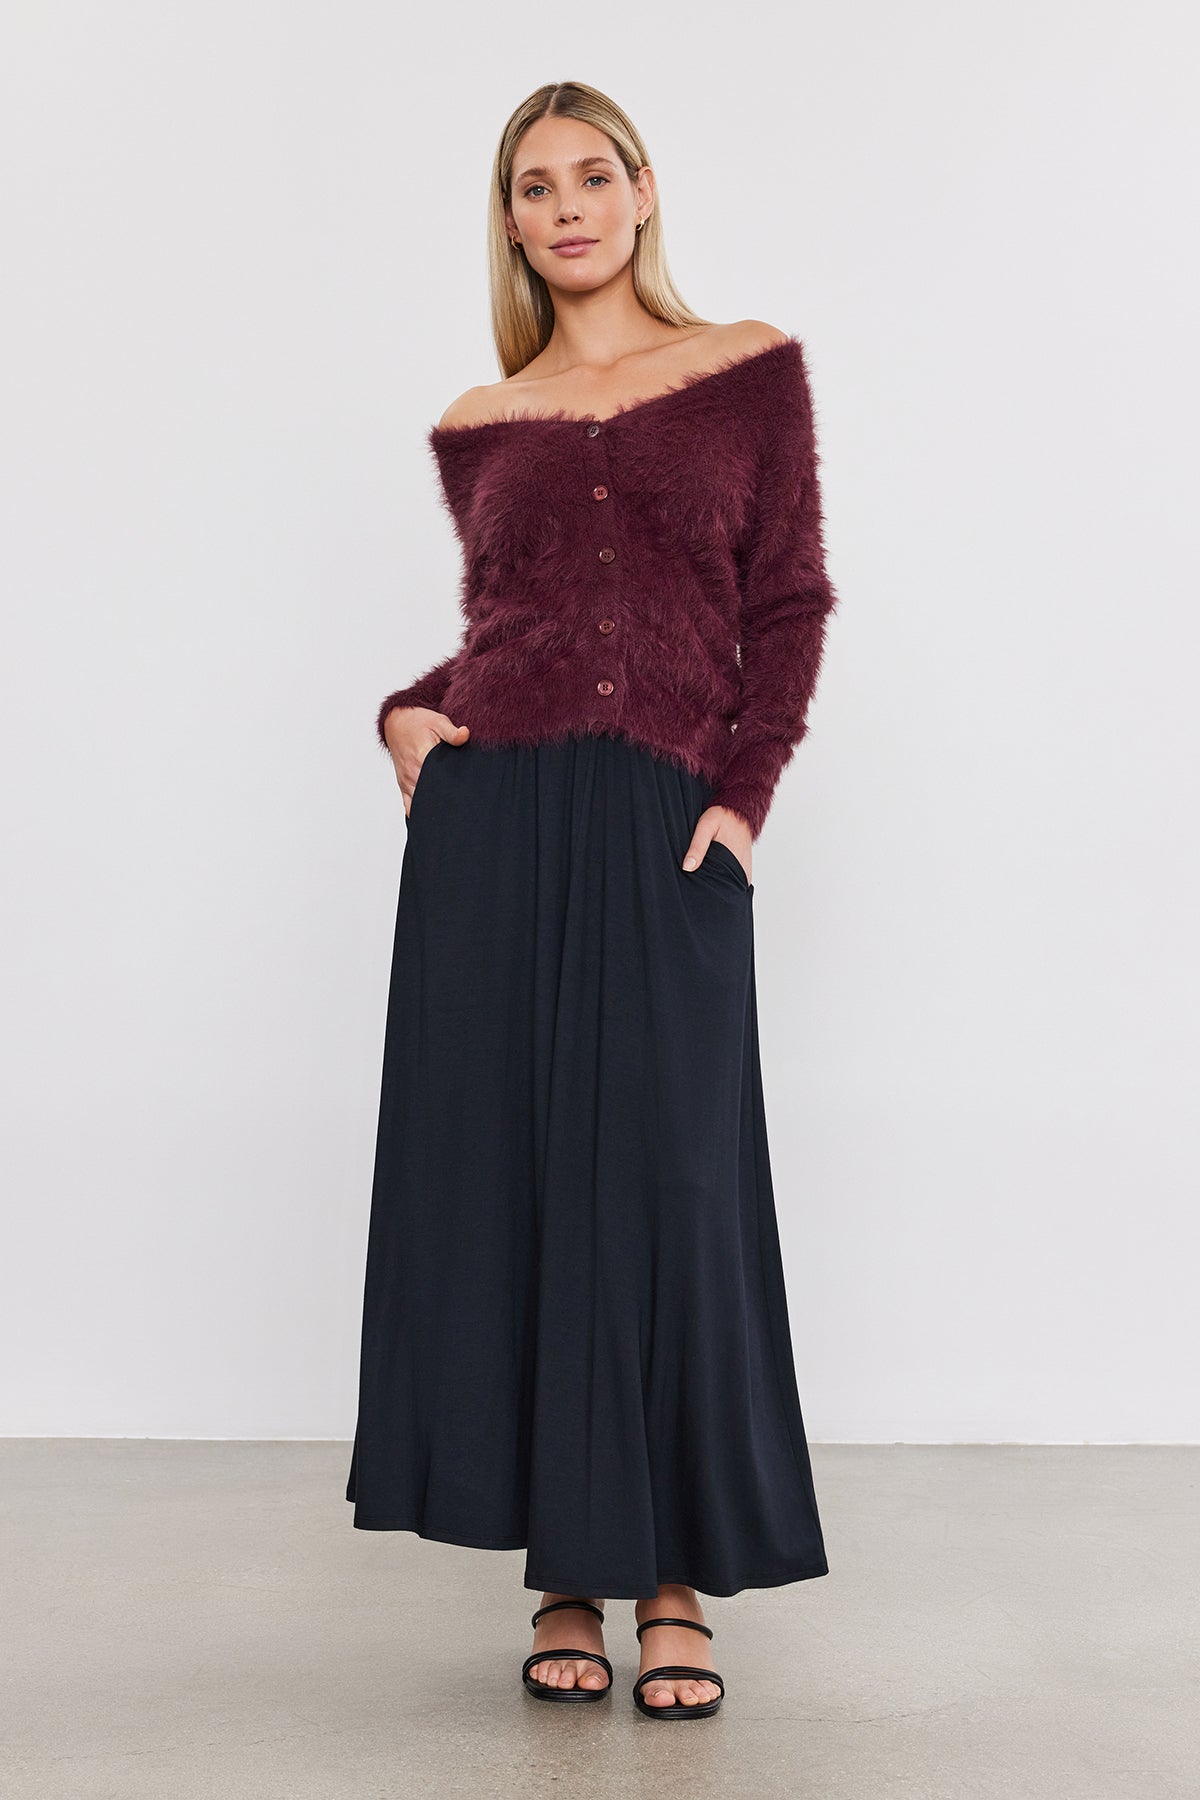 The model is wearing a burgundy sweater and black MALAYA MAXI SKIRT by Velvet by Graham & Spencer.-35660947882177